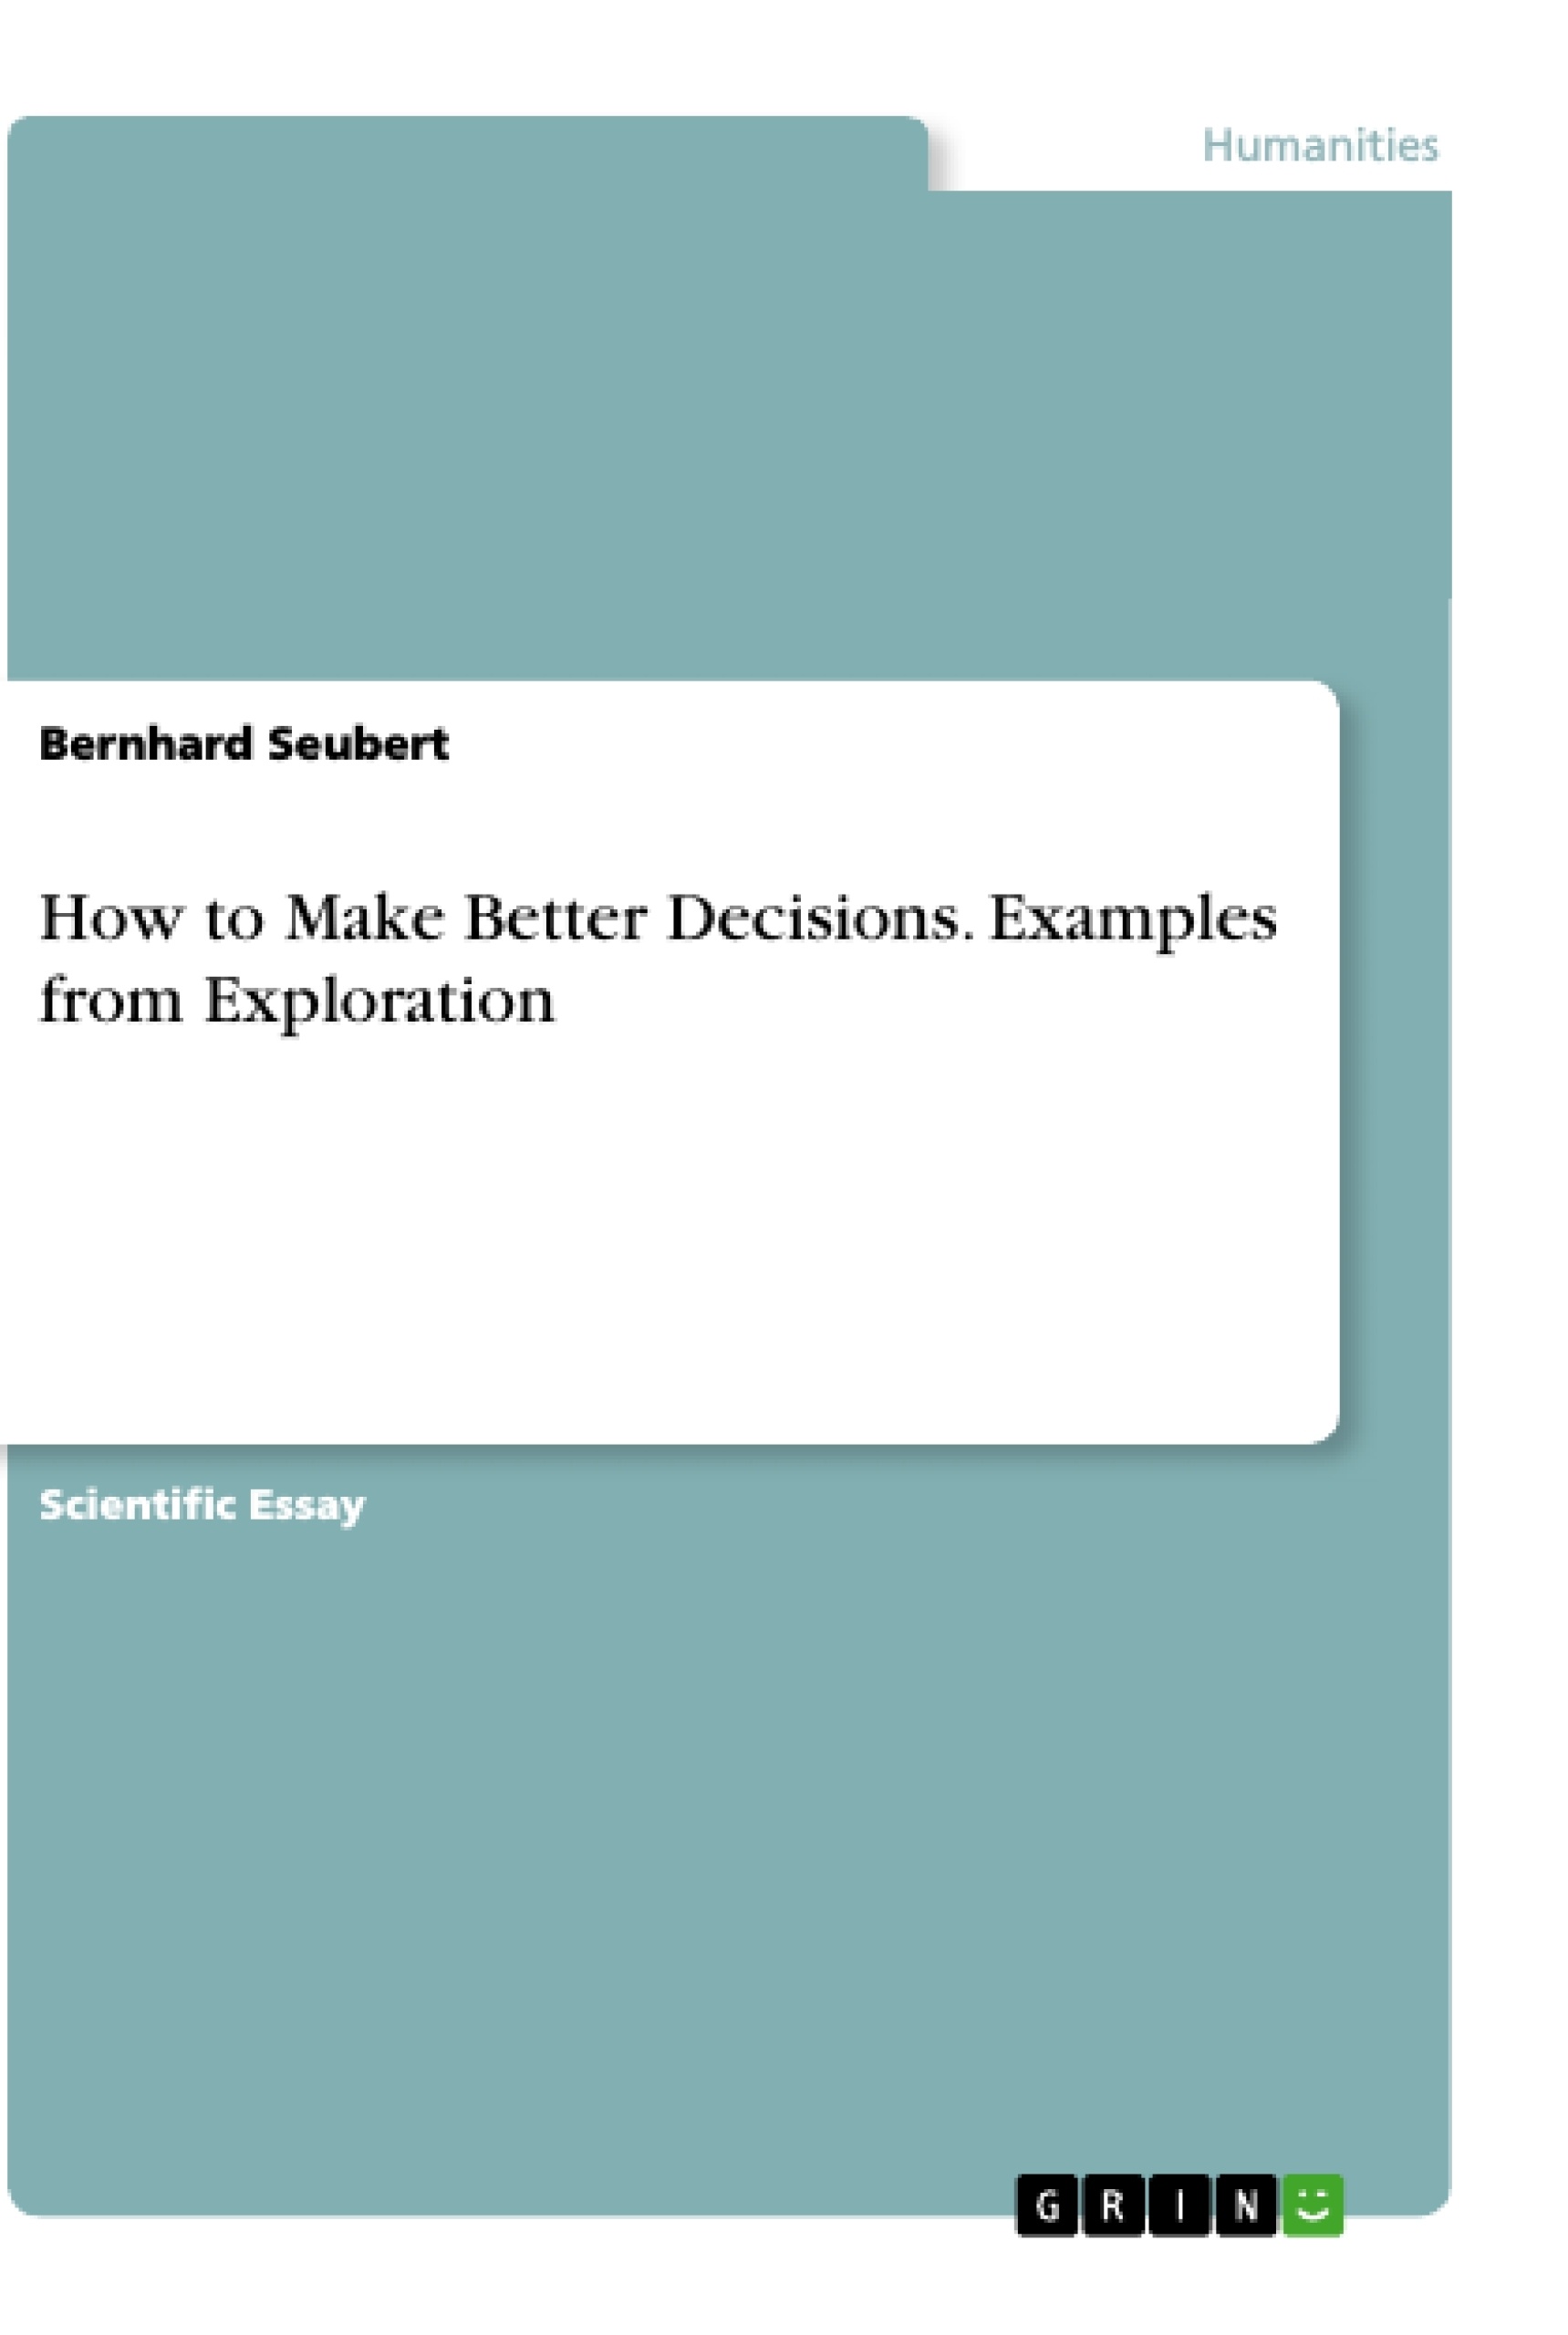 Título: How to Make Better Decisions. Examples from Exploration